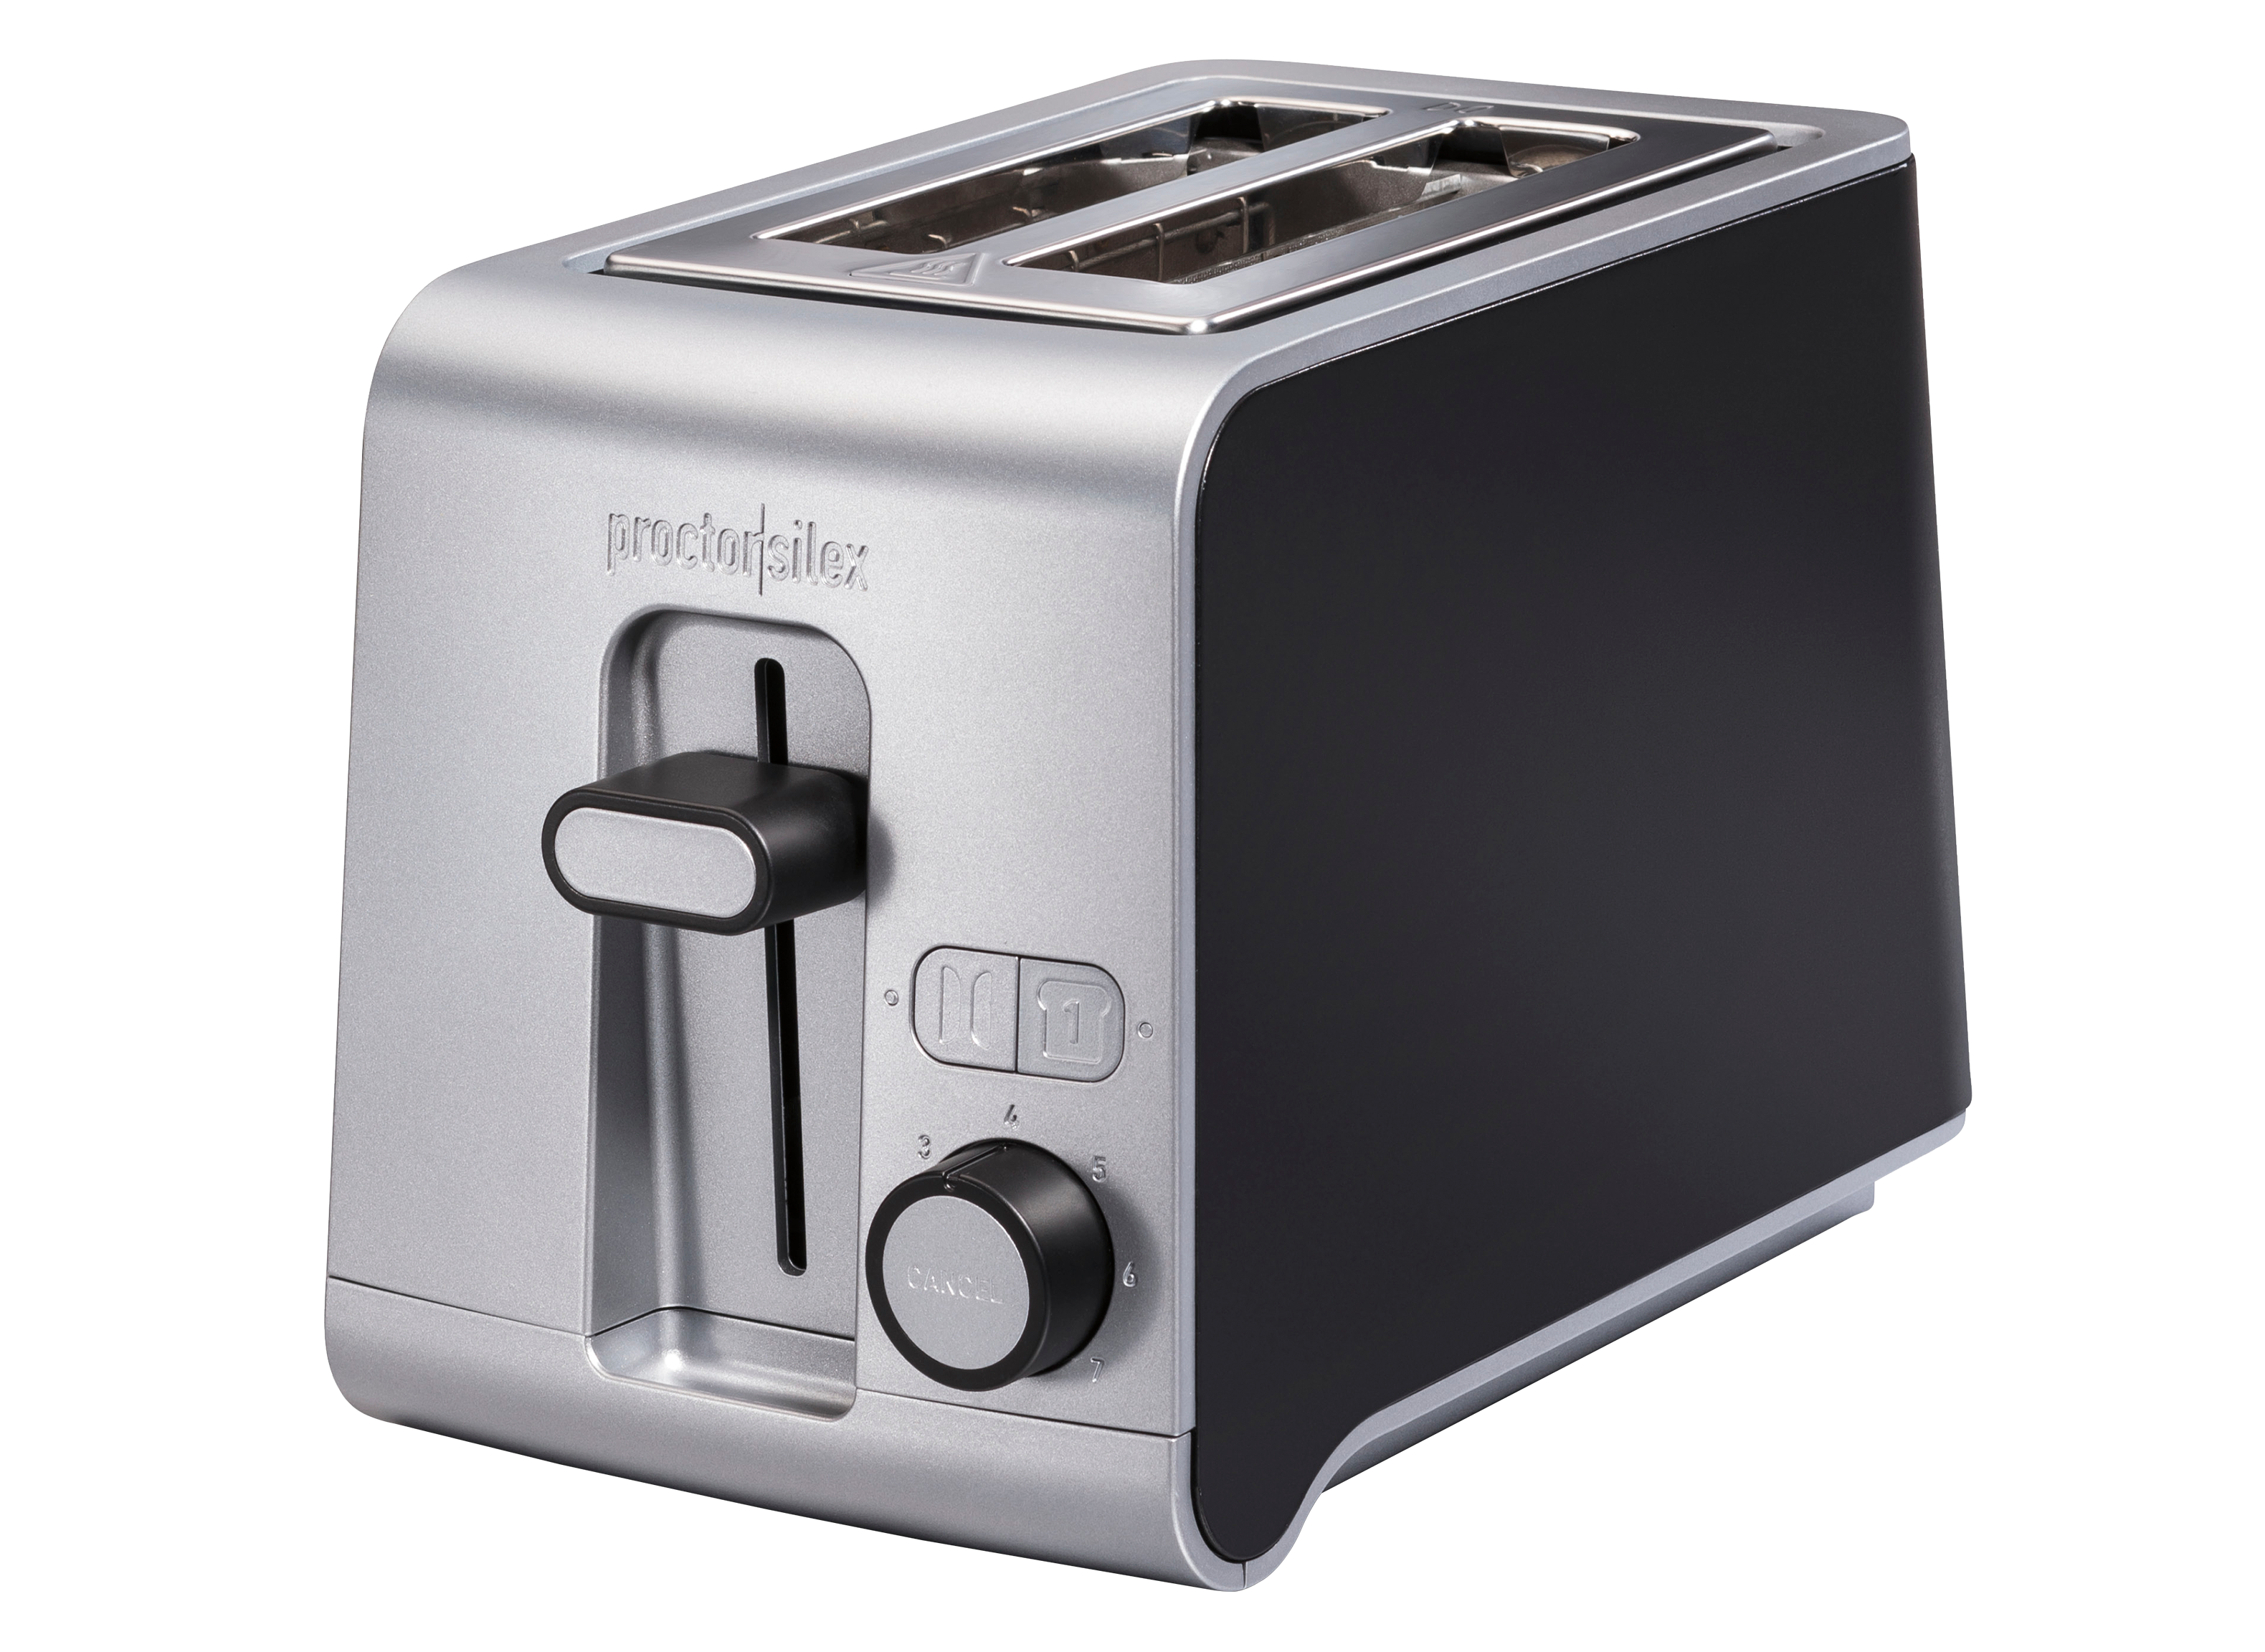 https://crdms.images.consumerreports.org/prod/products/cr/models/406615-2-slice-toasters-proctor-silex-sure-toast-2-slice-toaster-10029666.png